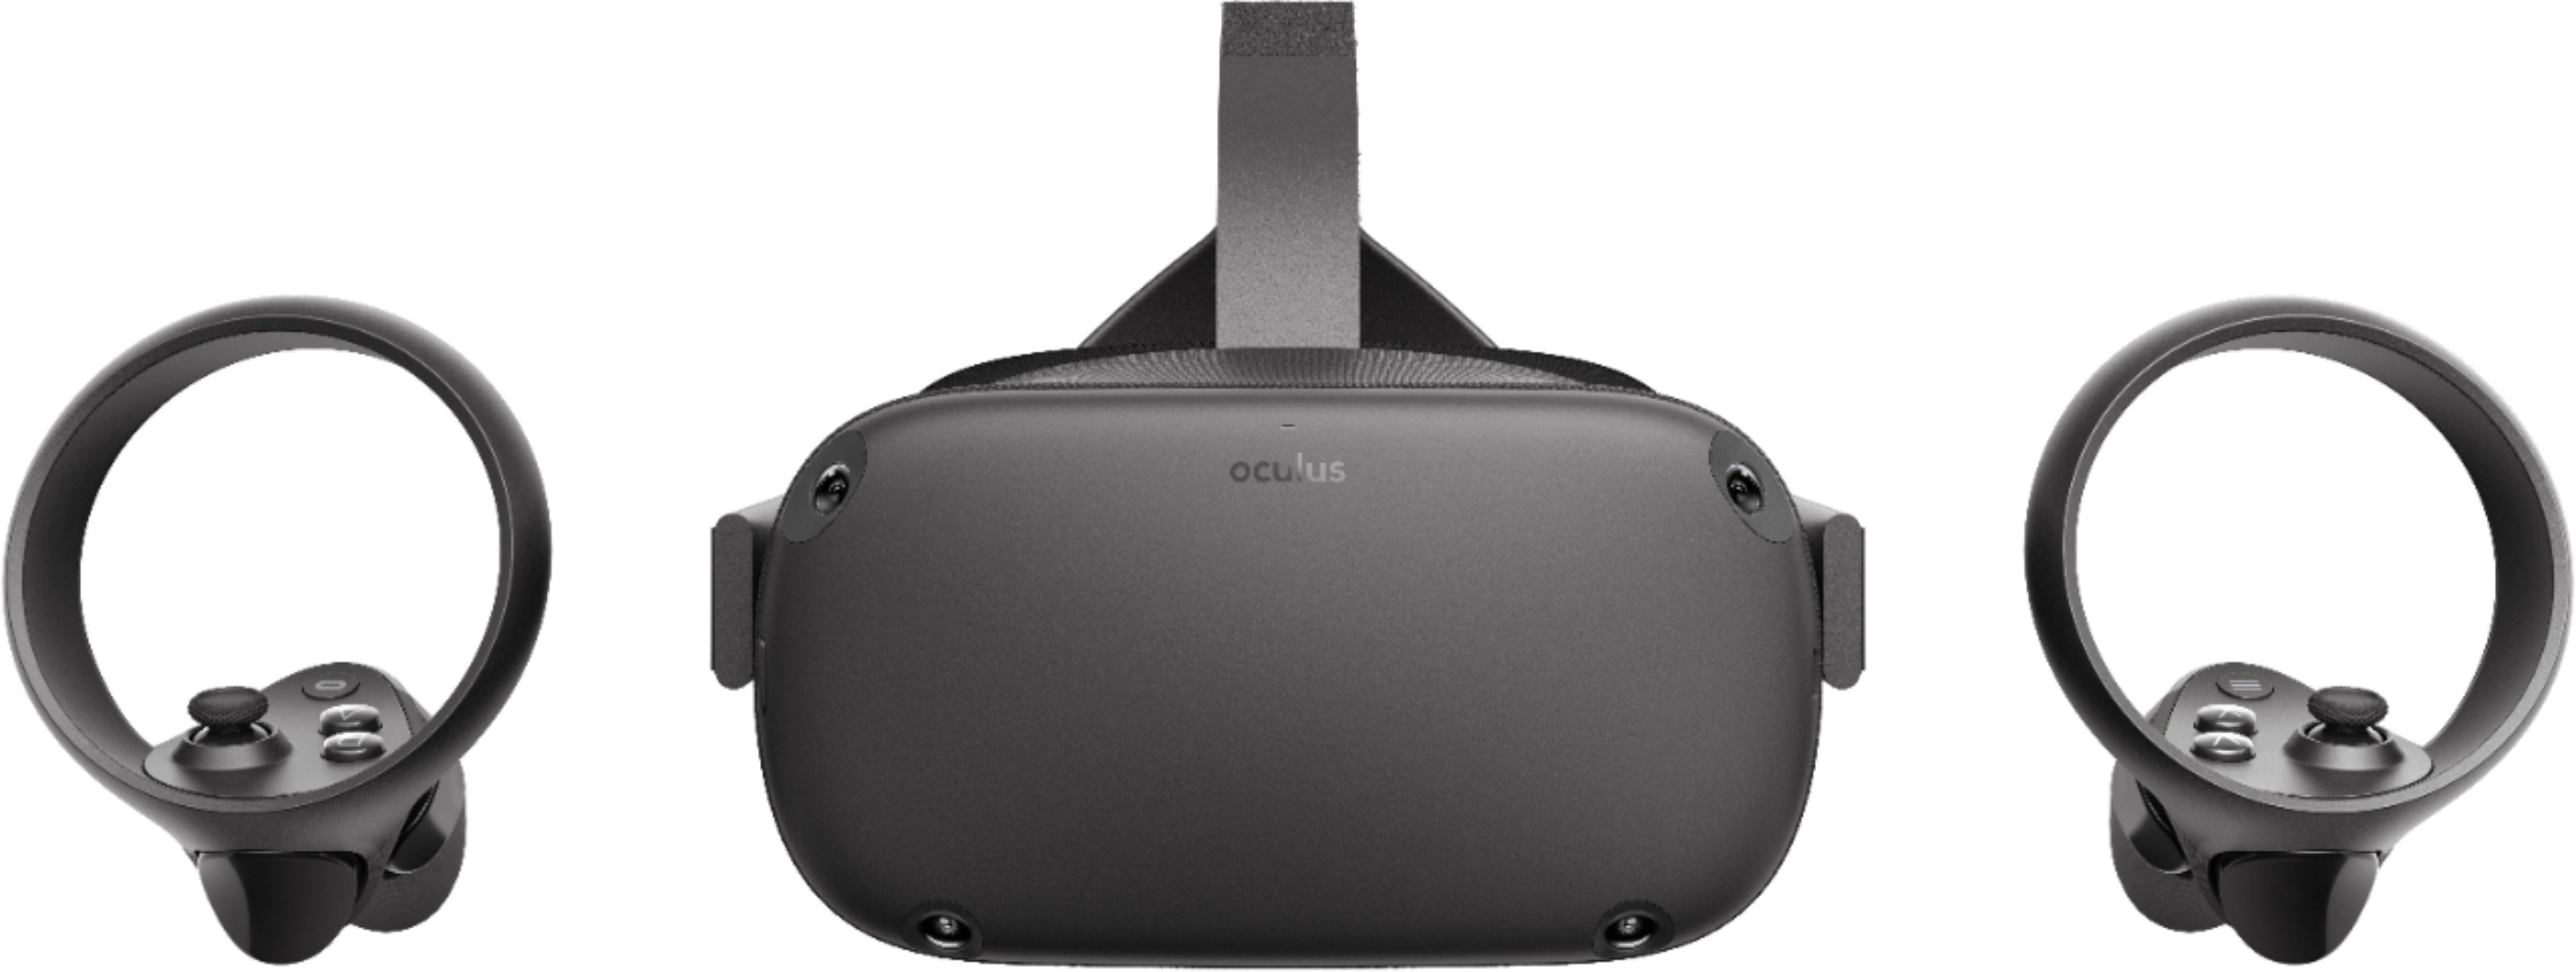 Best Buy: Oculus Quest All in one VR Gaming Headset GB